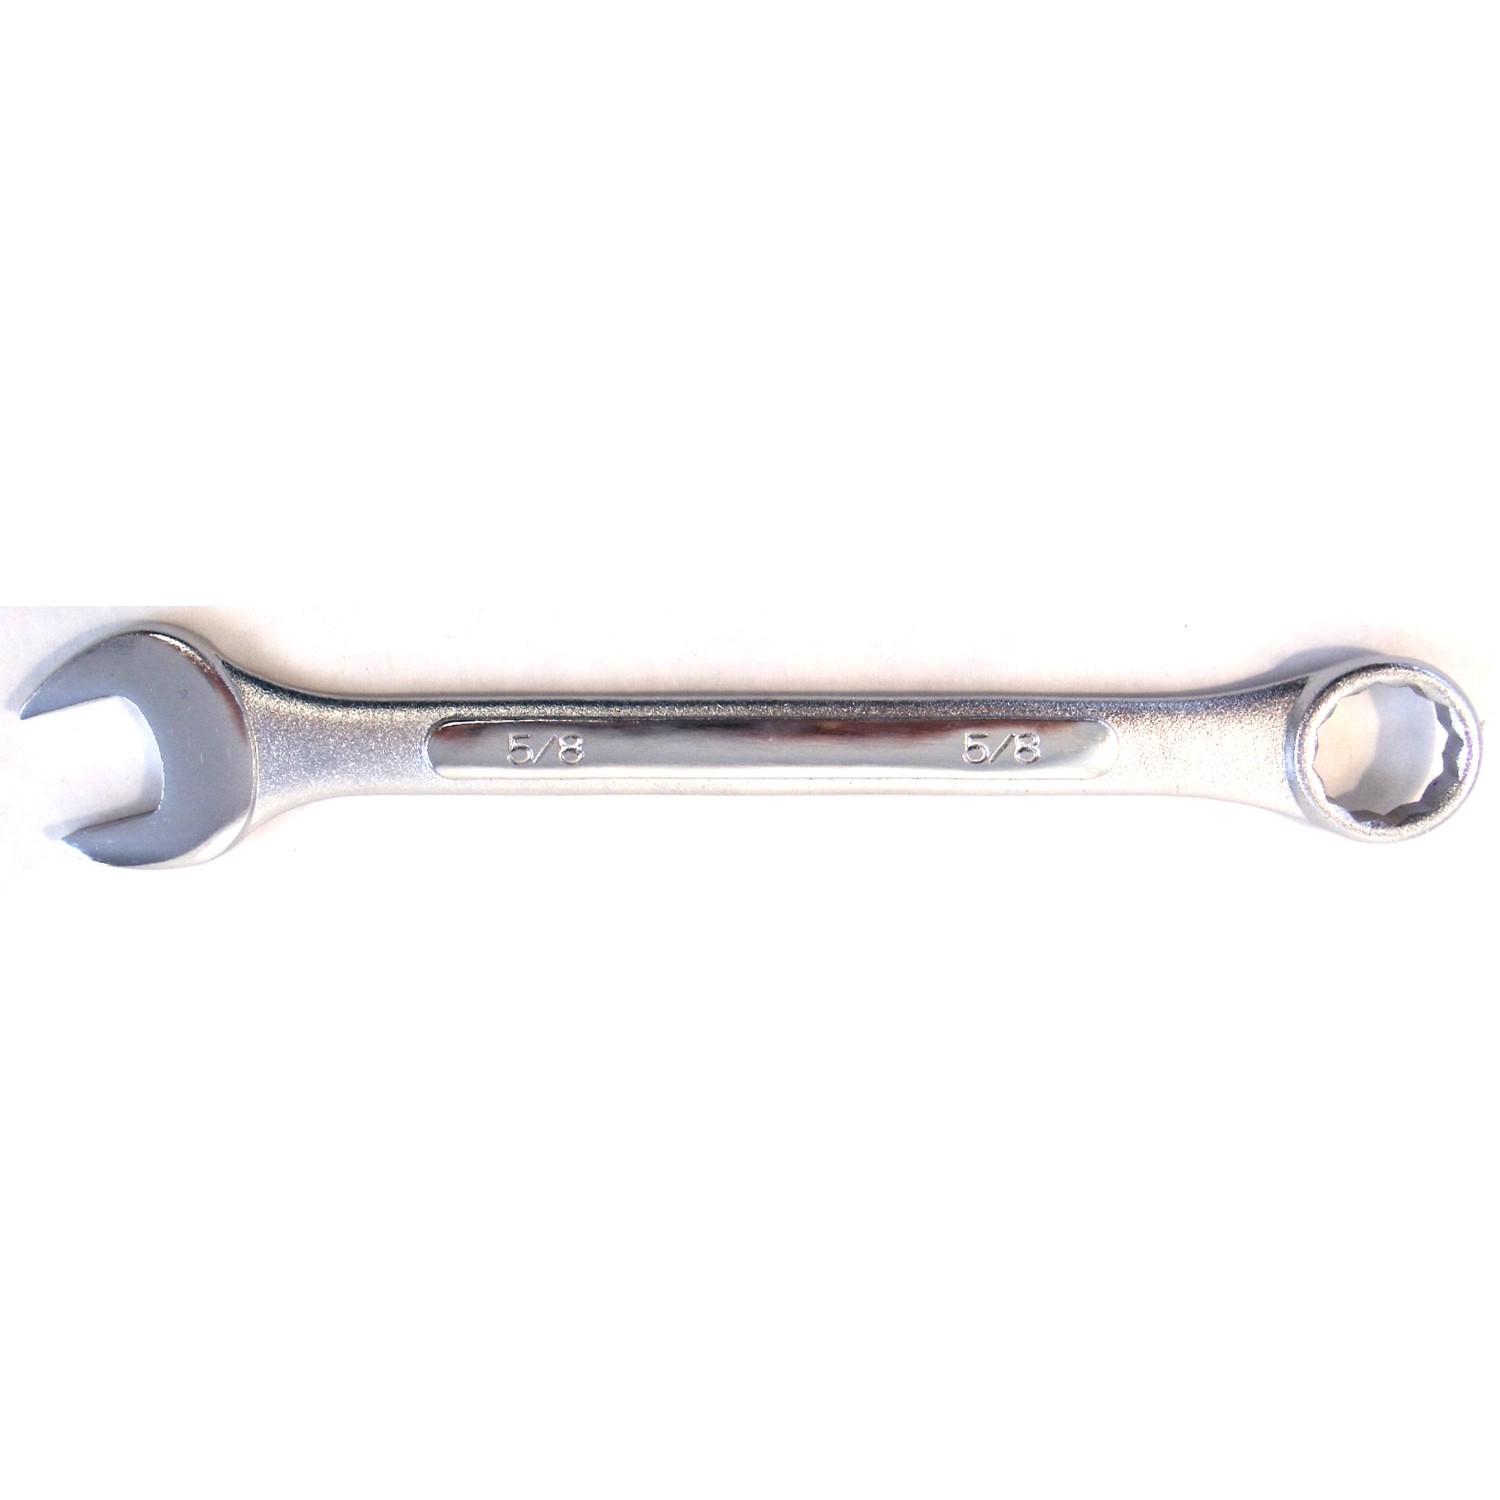 Drop Forged 5/8" Open/Box End Wrench - Bulk